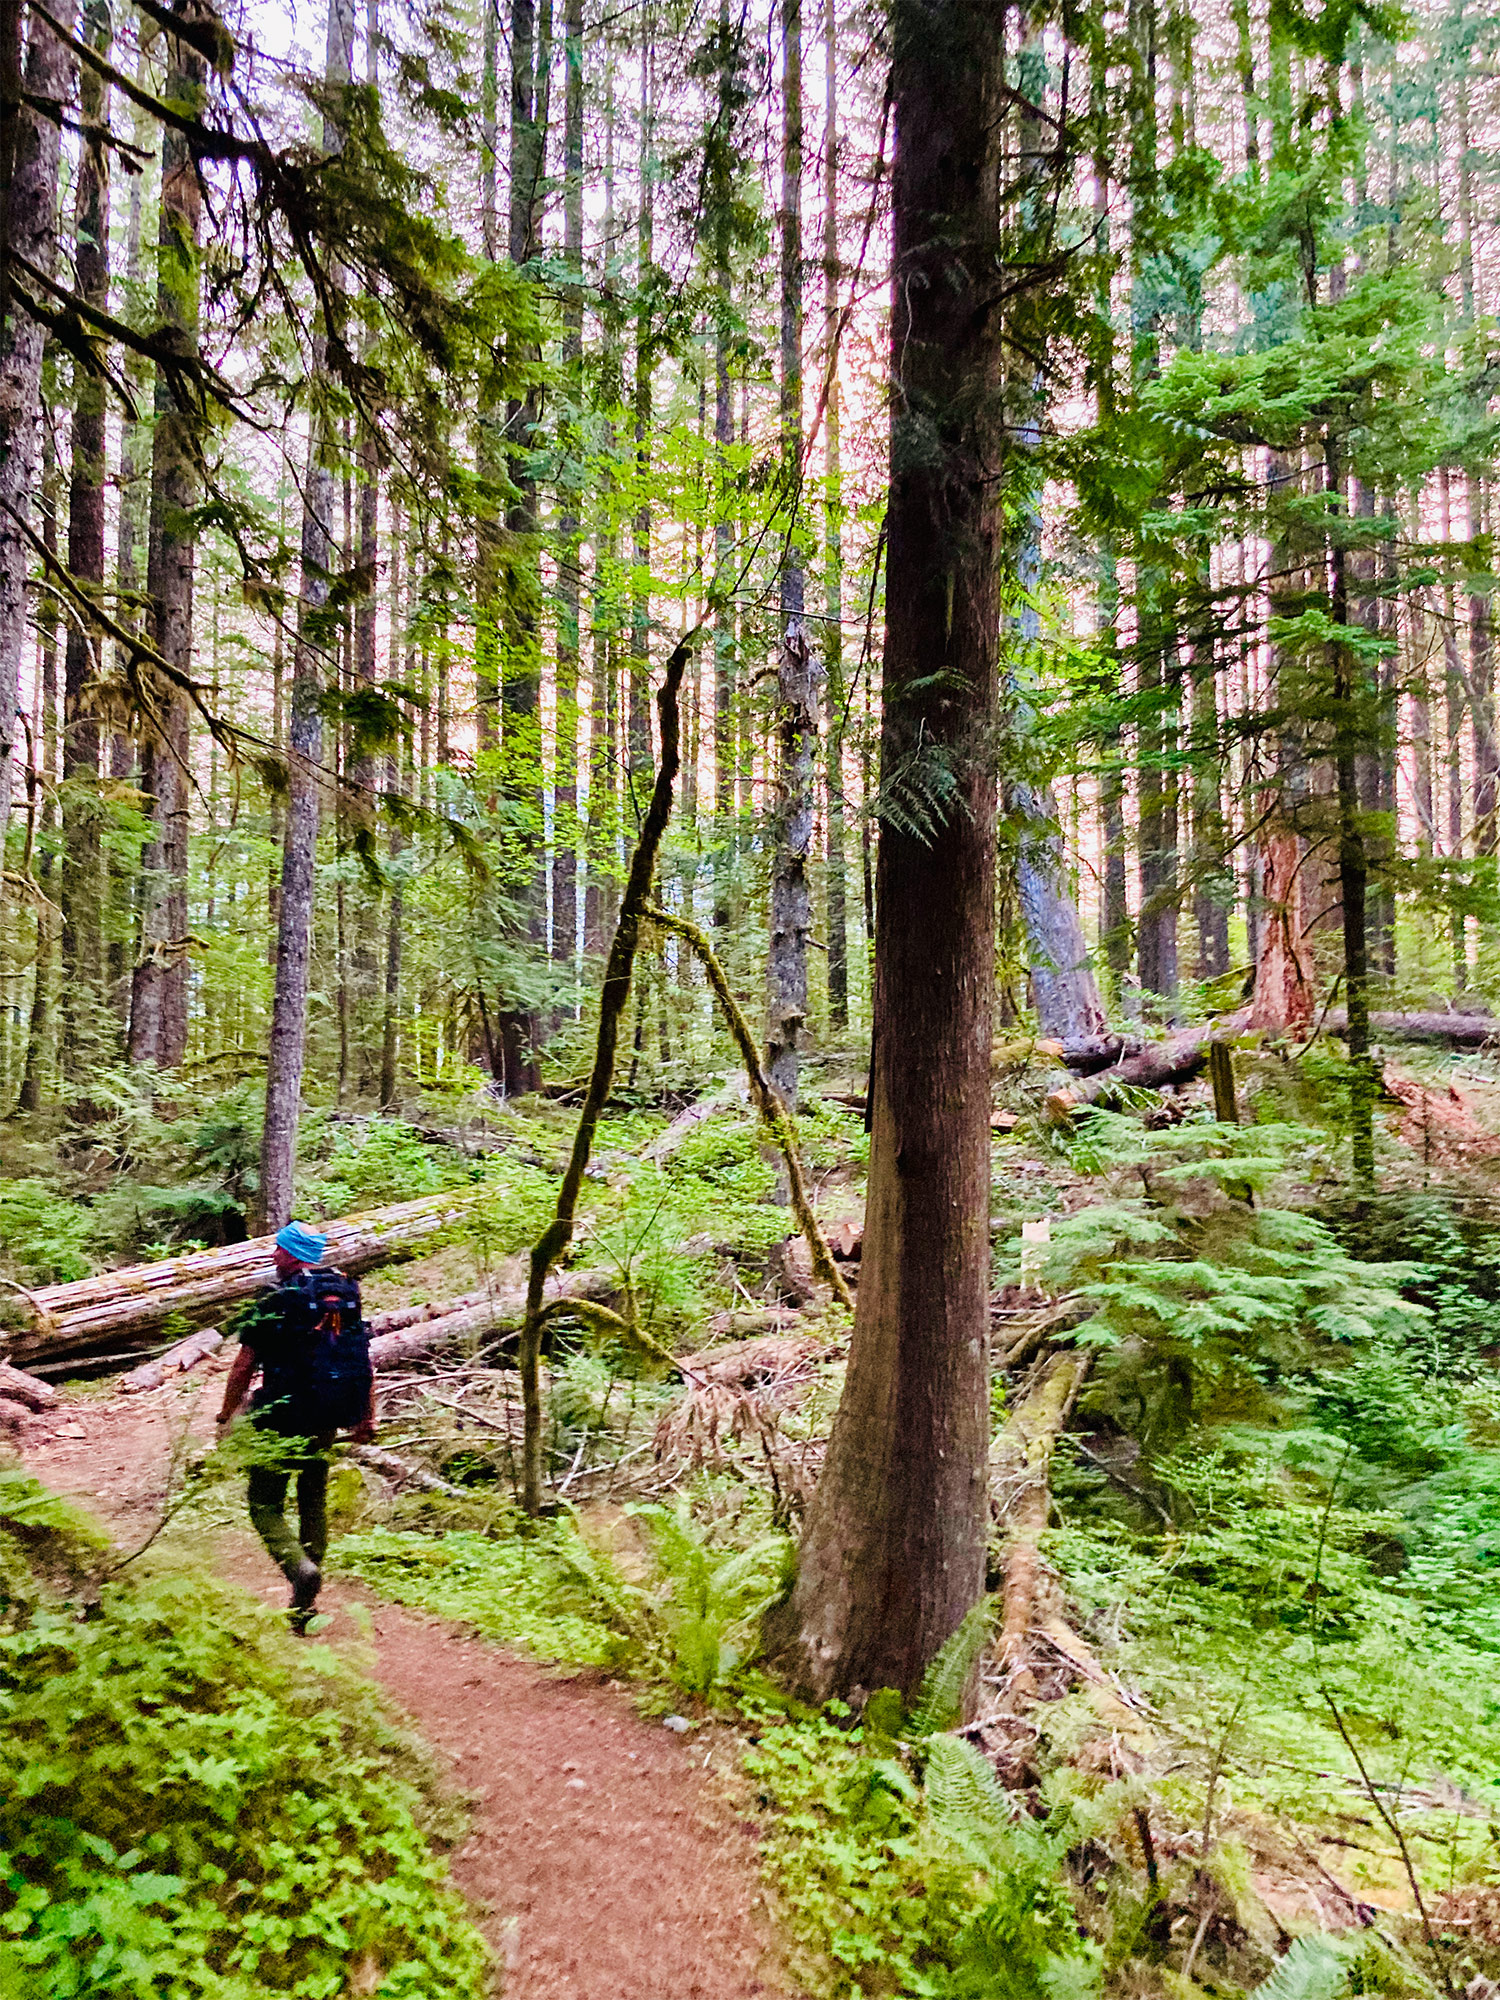 Search and rescue volunteer walking among trees